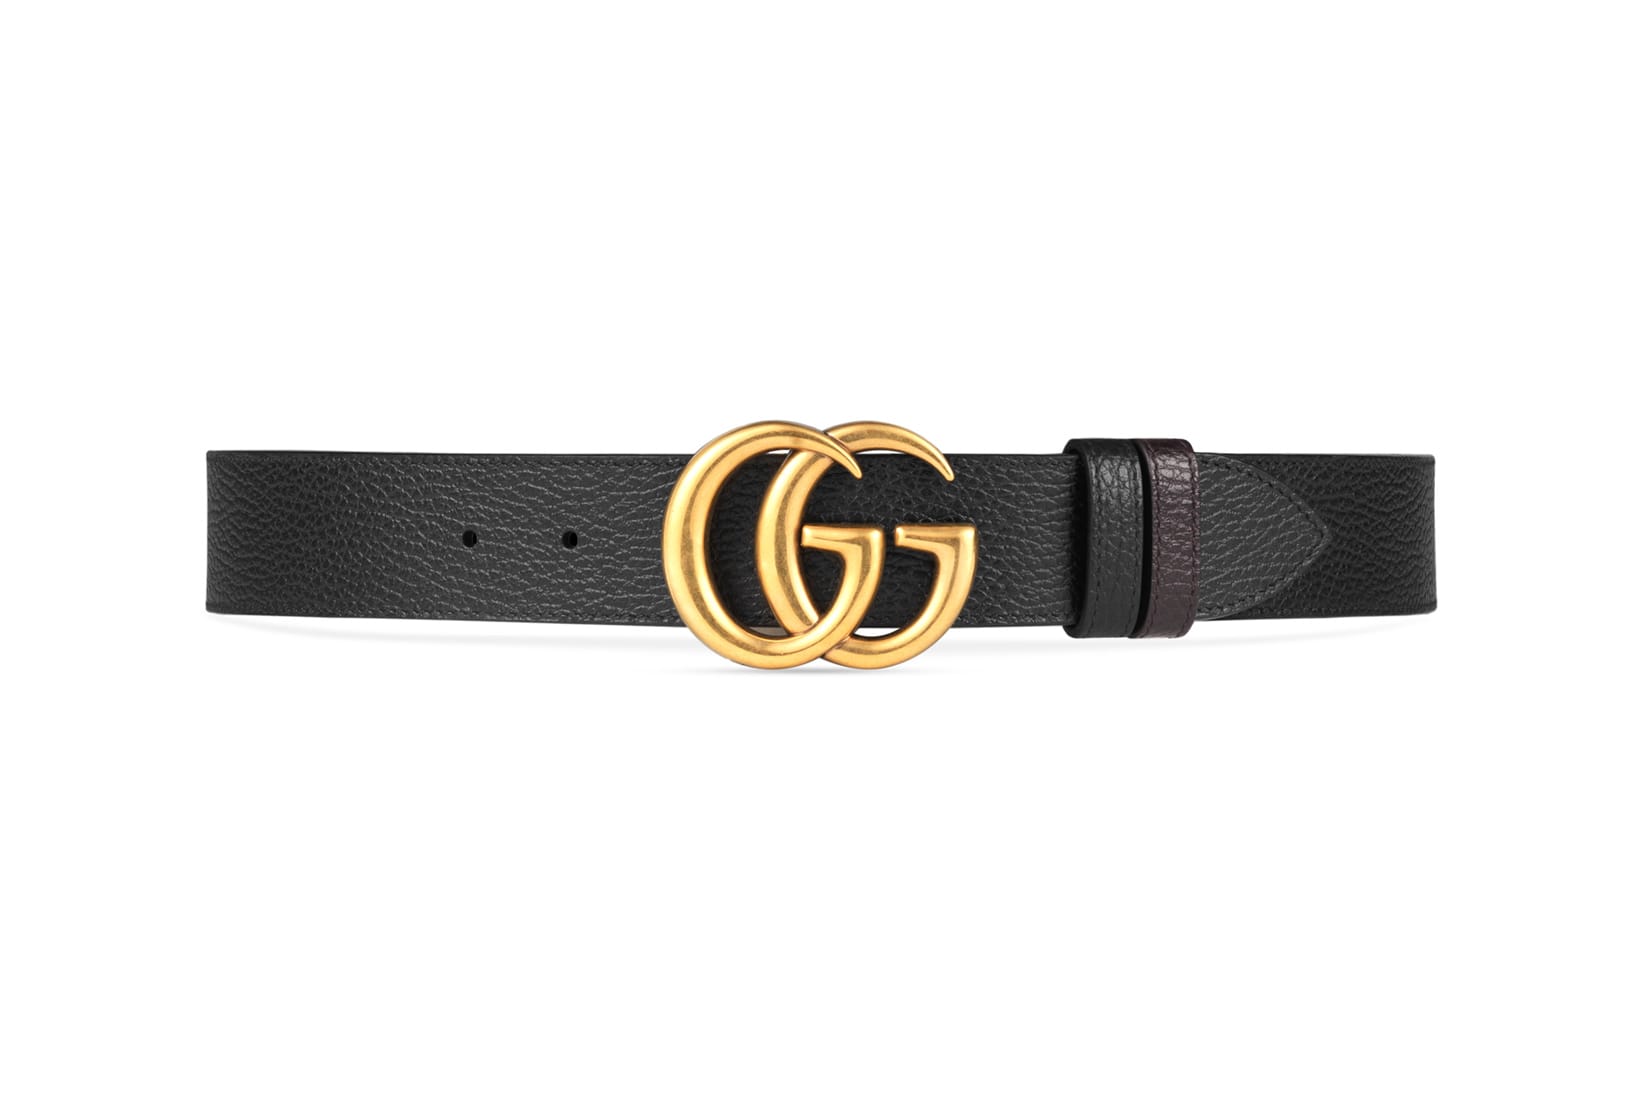 what does the gg stand for in gucci